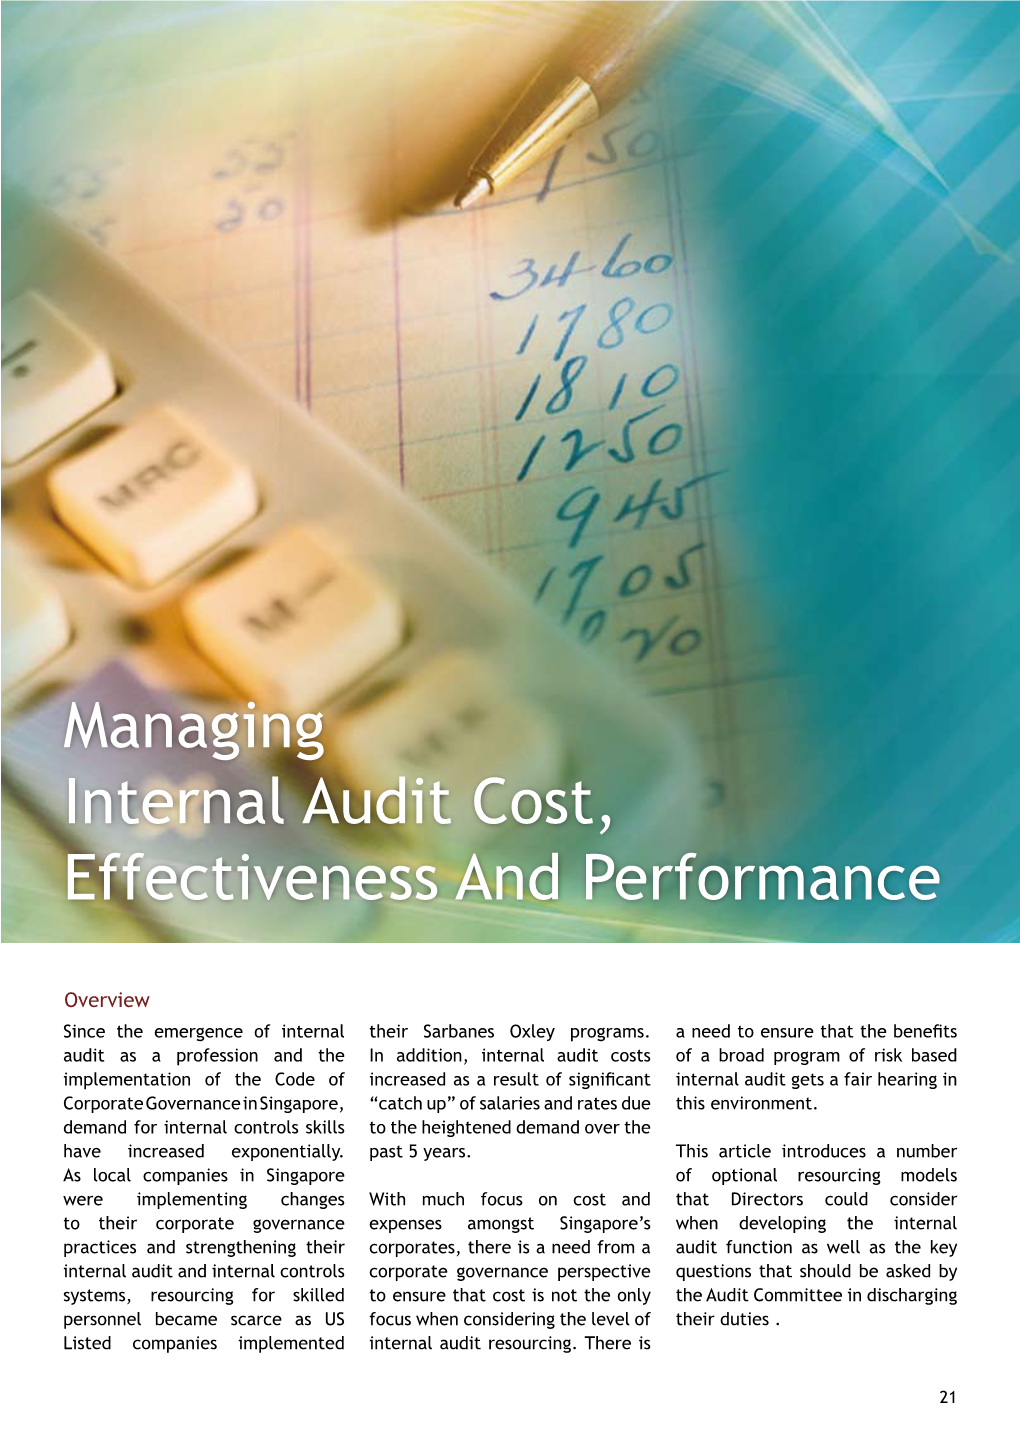 Managing Internal Audit Cost, Effectiveness and Performance